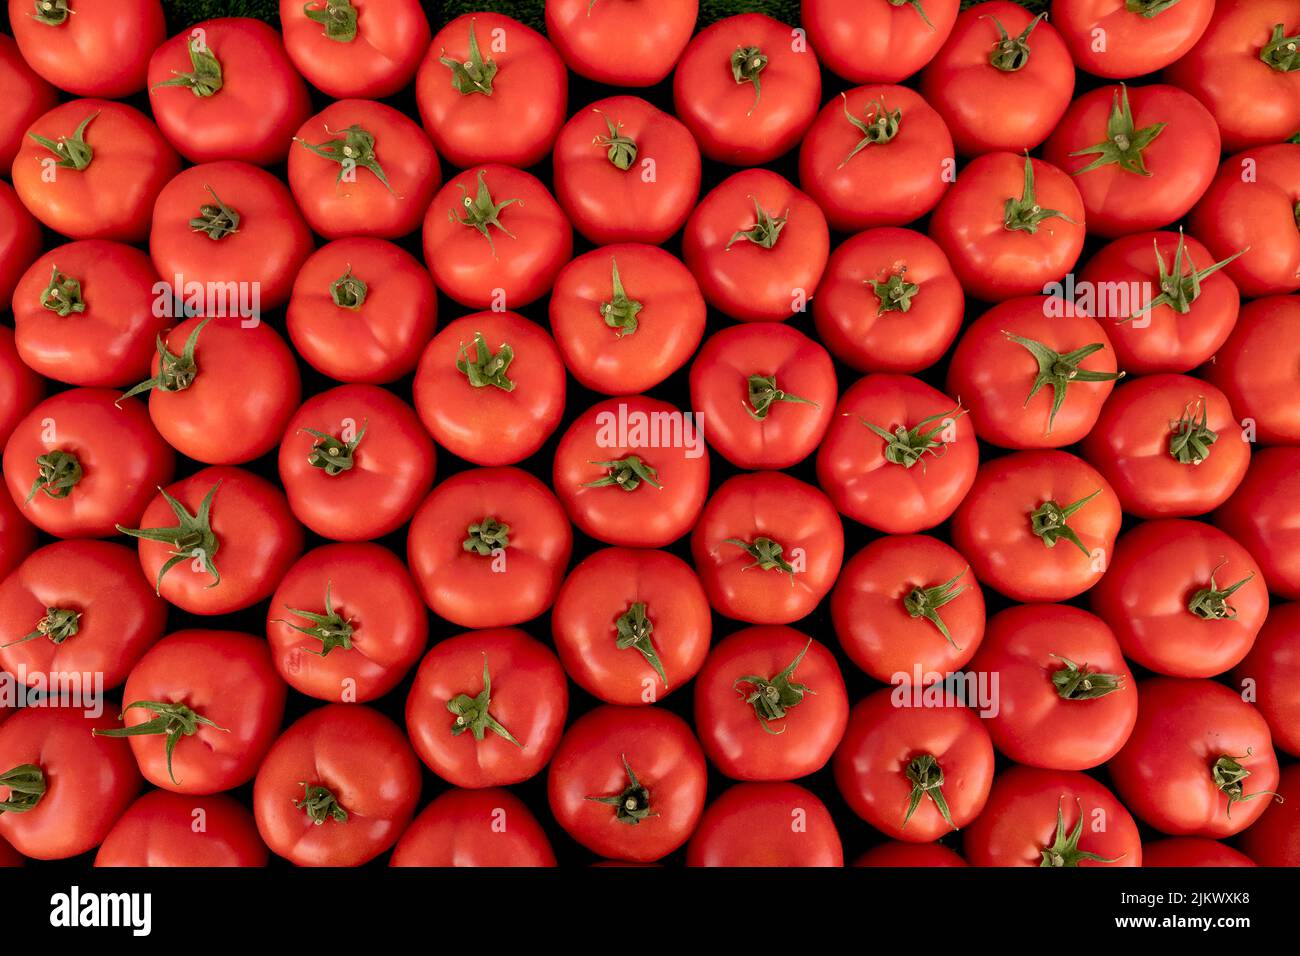 background with fresh red tomatoes in market Stock Photo